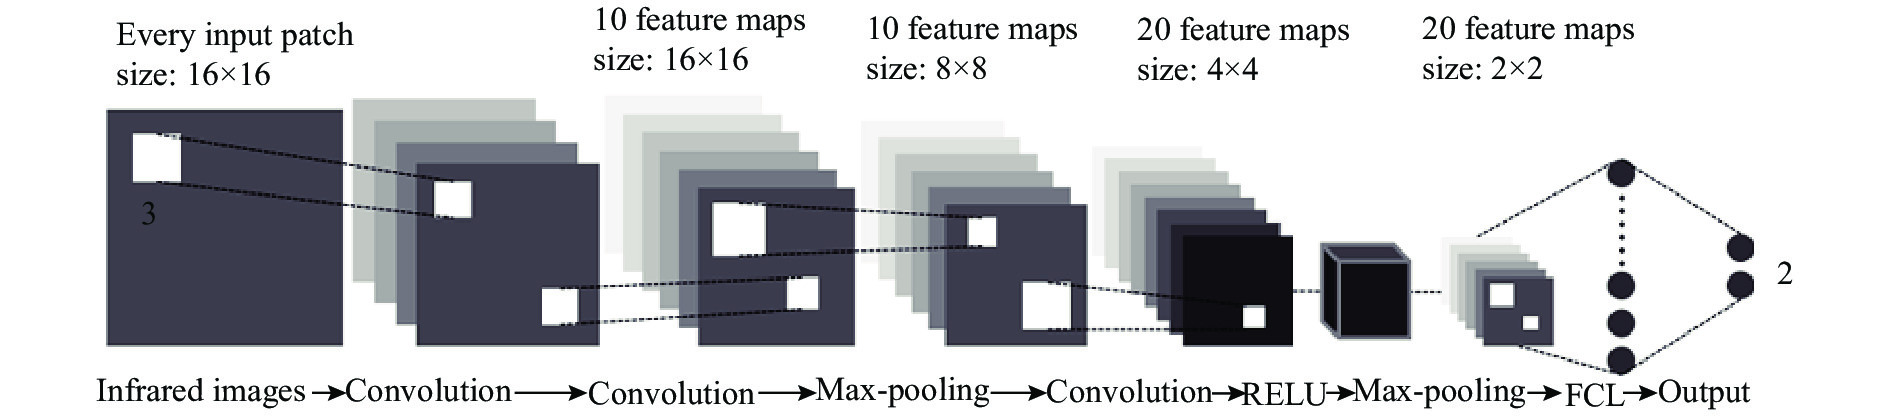 Convolutional neural network structure